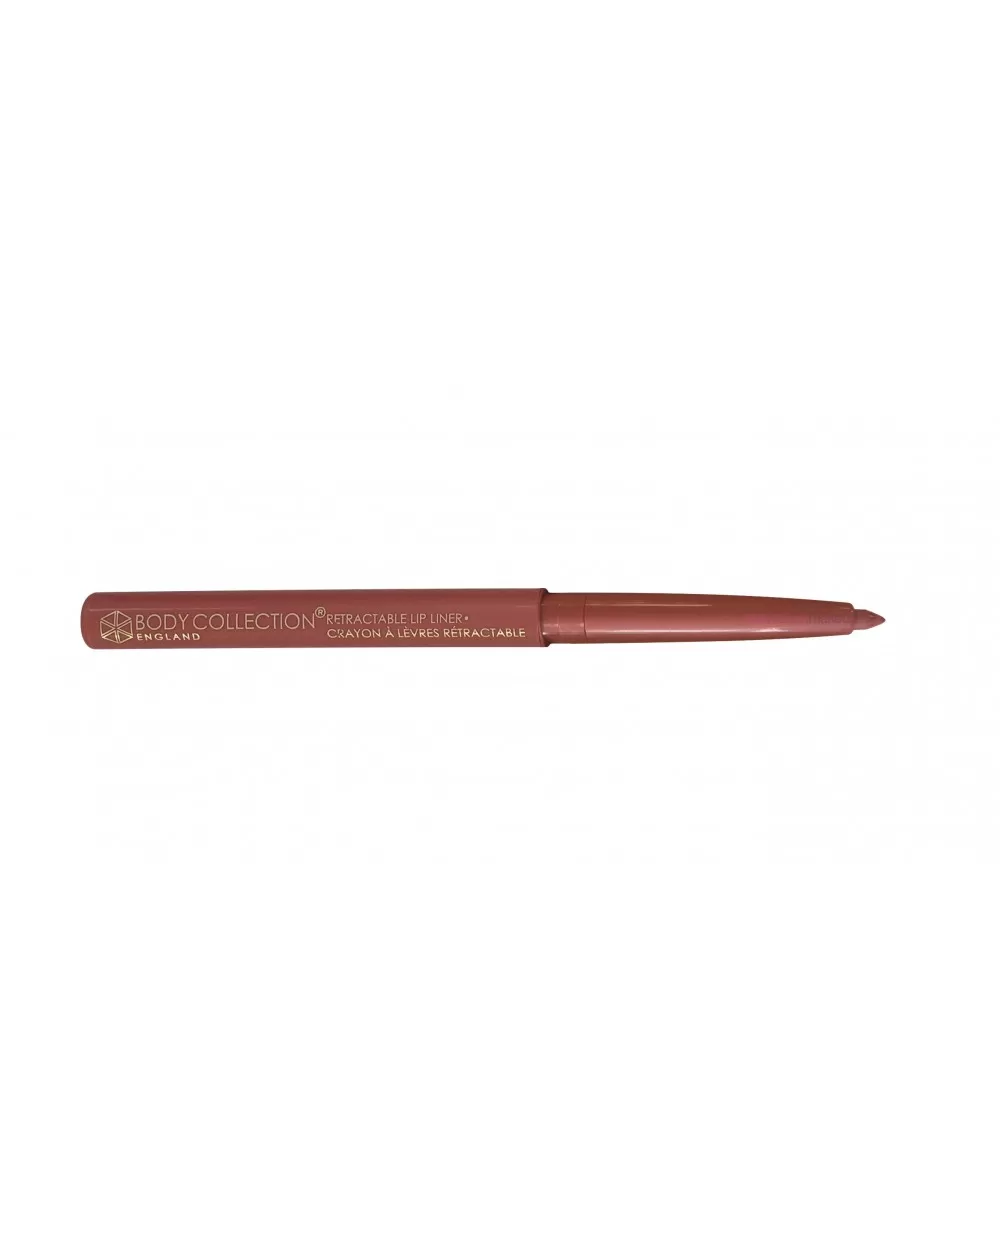 body-collection-lip-liner-tender-kiss-4961-1000x1250w